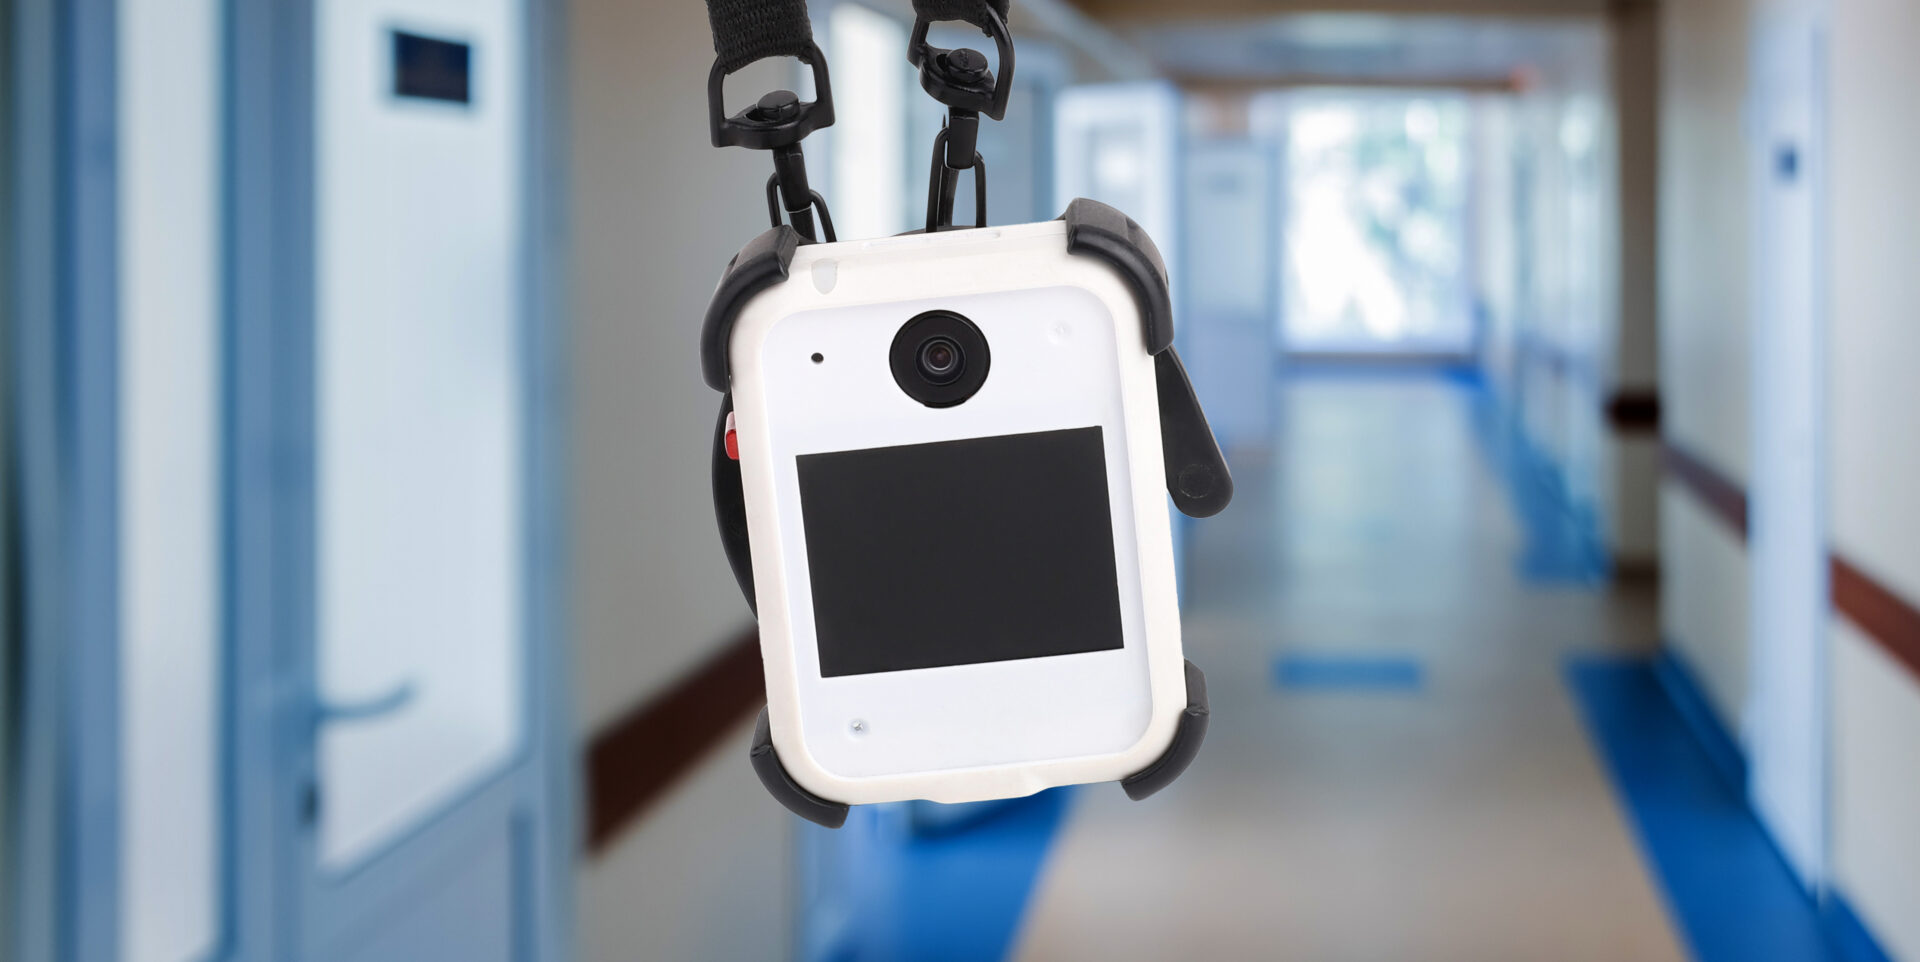 A body worn camera, shown in front of a hospital corridor